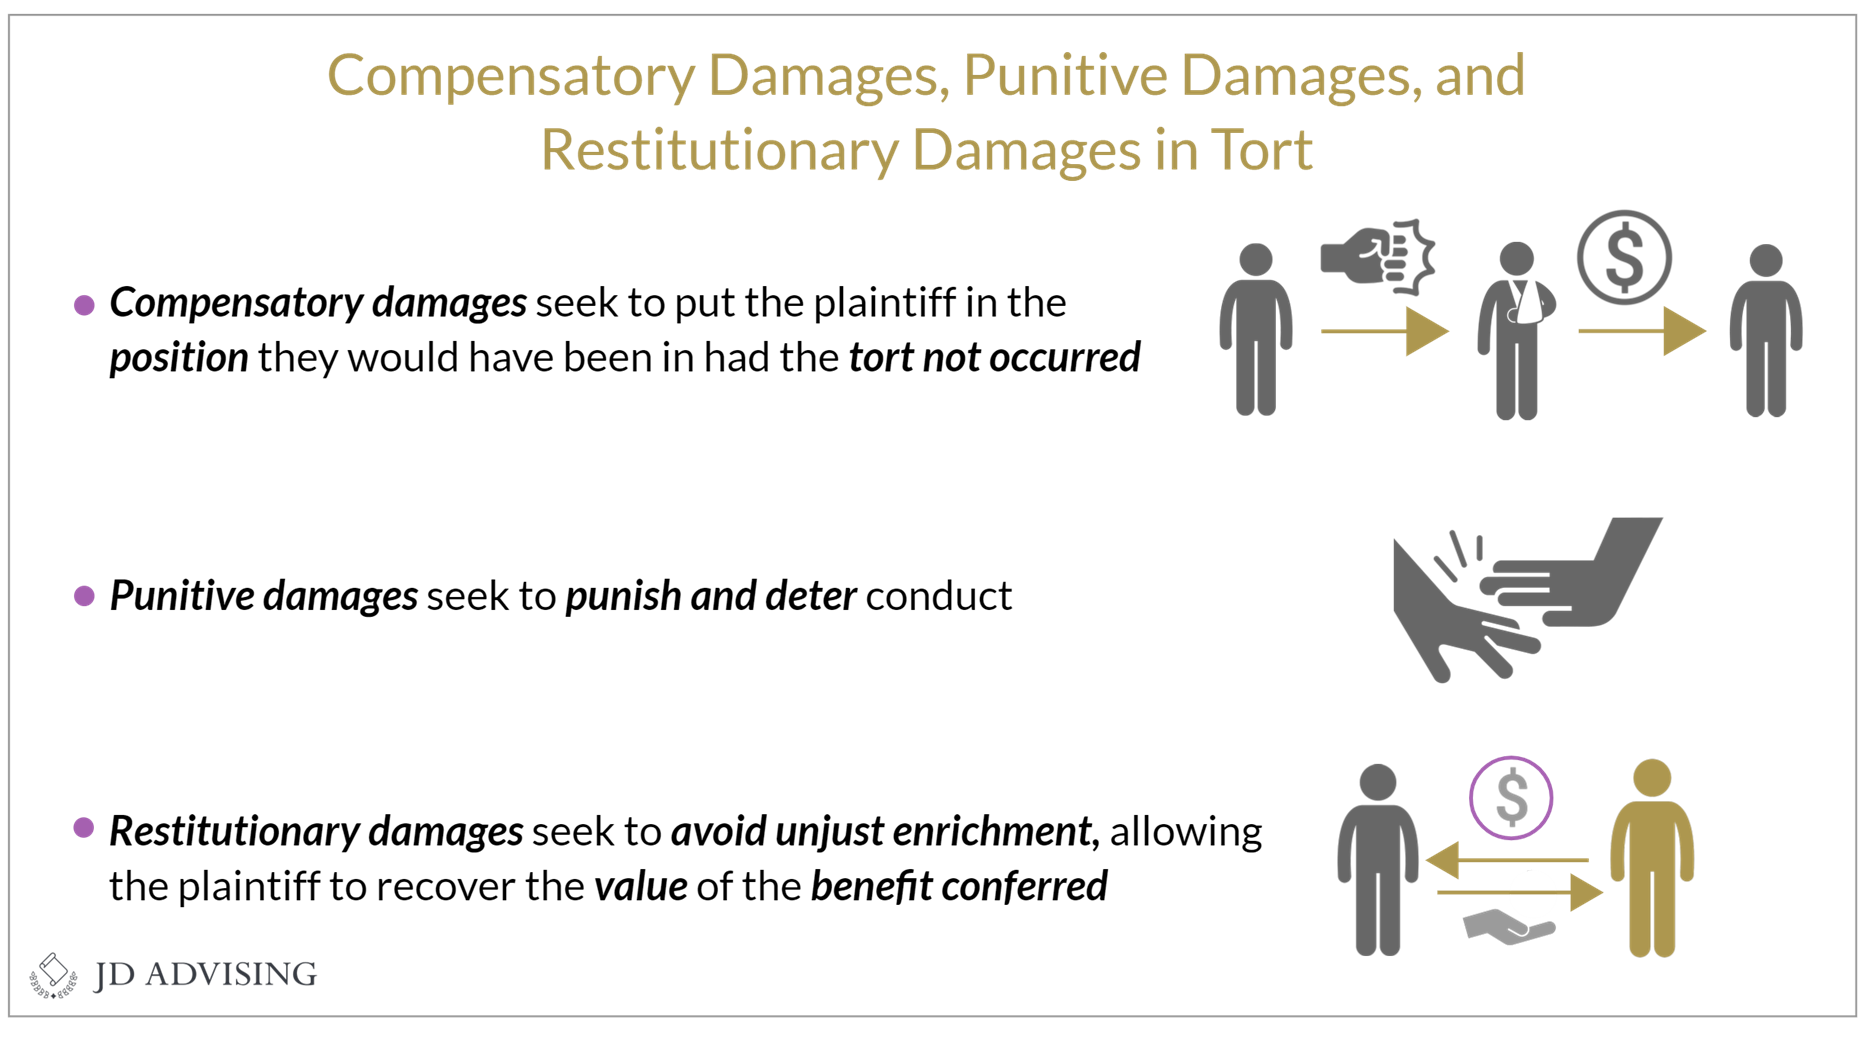 •	Compensatory damages, punitive damages, and restitutionary damages in tort